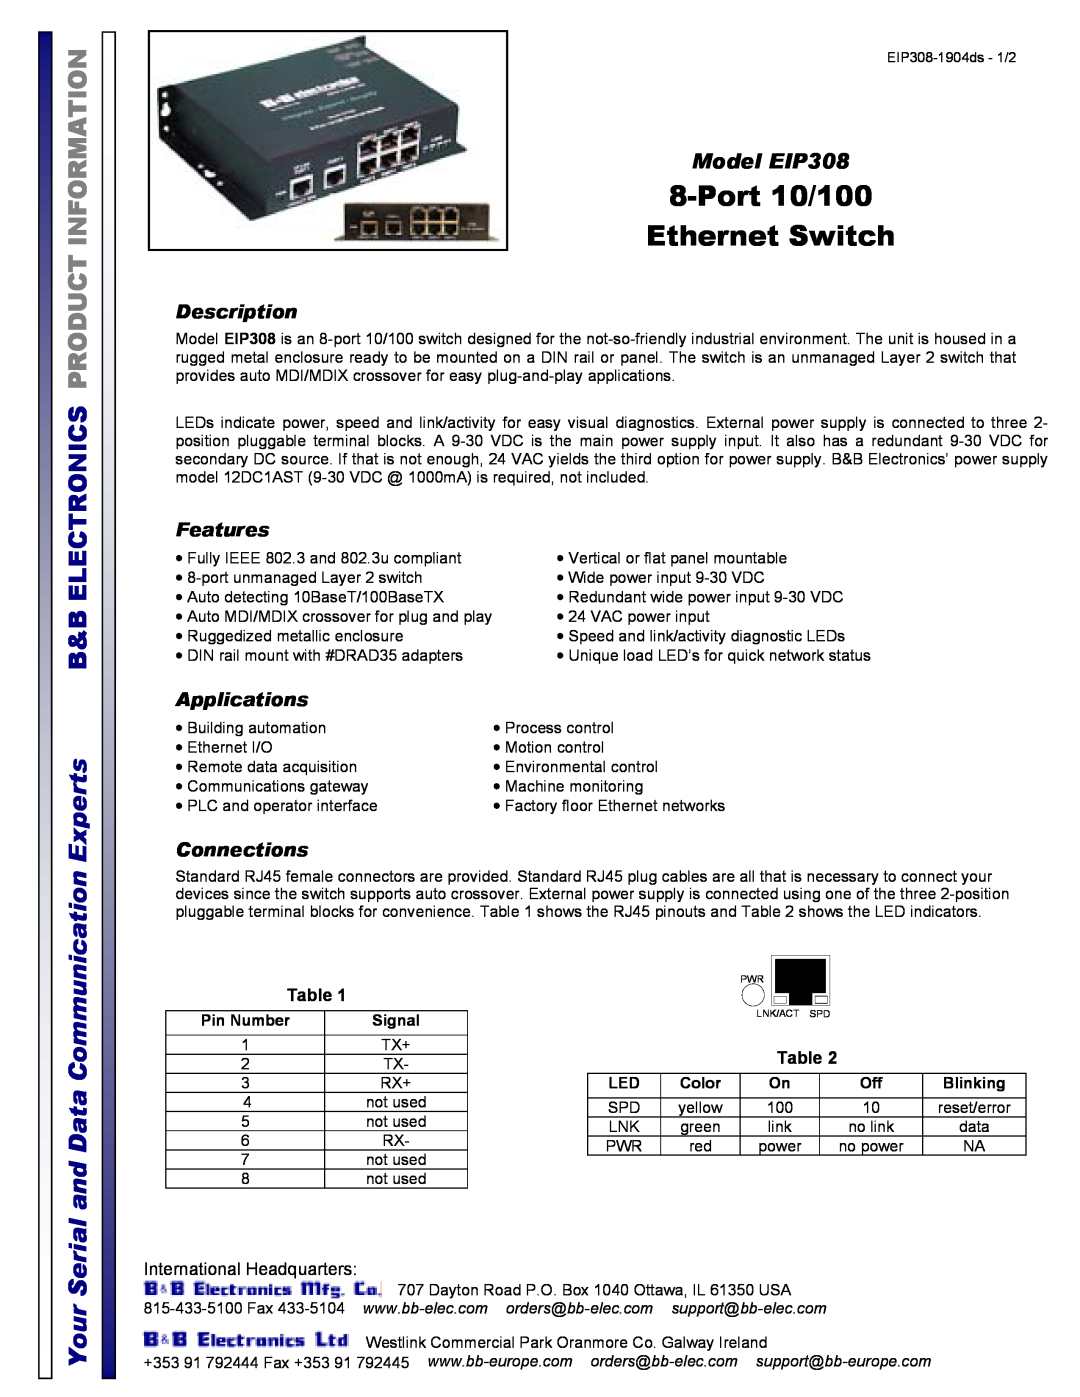 B&B Electronics EIP308 manual Experts, Your, Description, Features, Applications, Connections, International Headquarters 